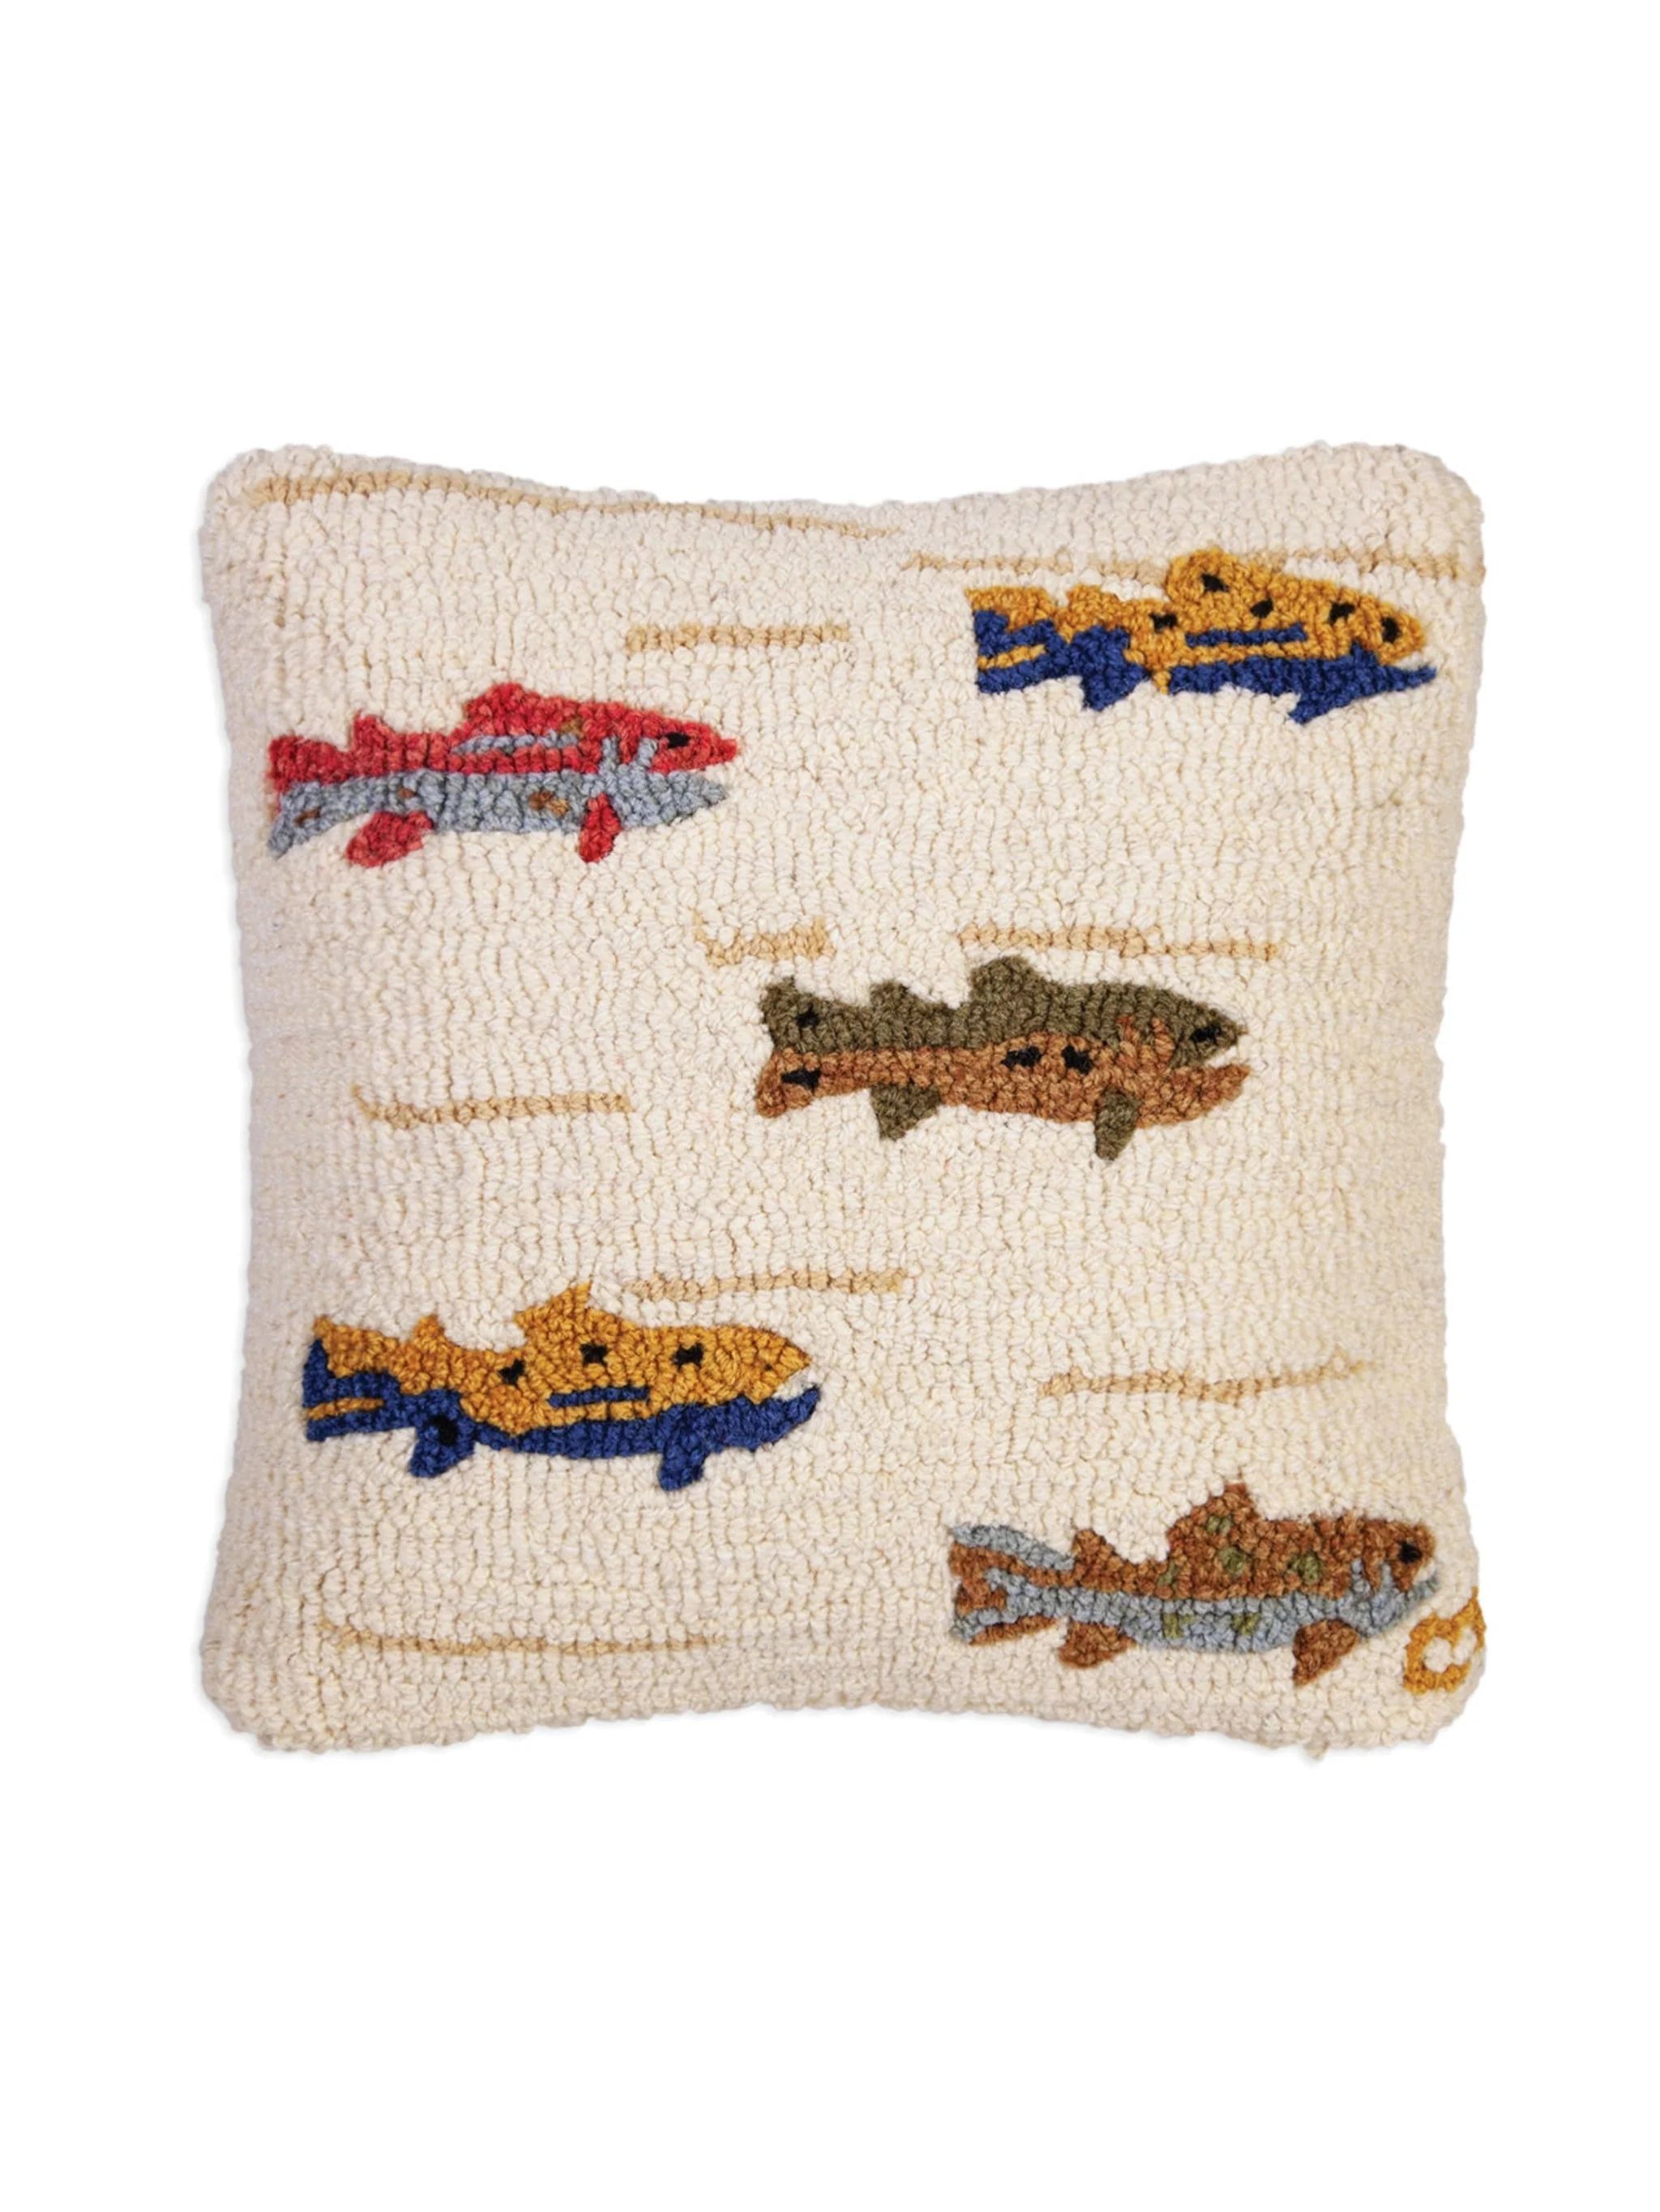 Trout Hooked Wool Square Pillow | Weston Table